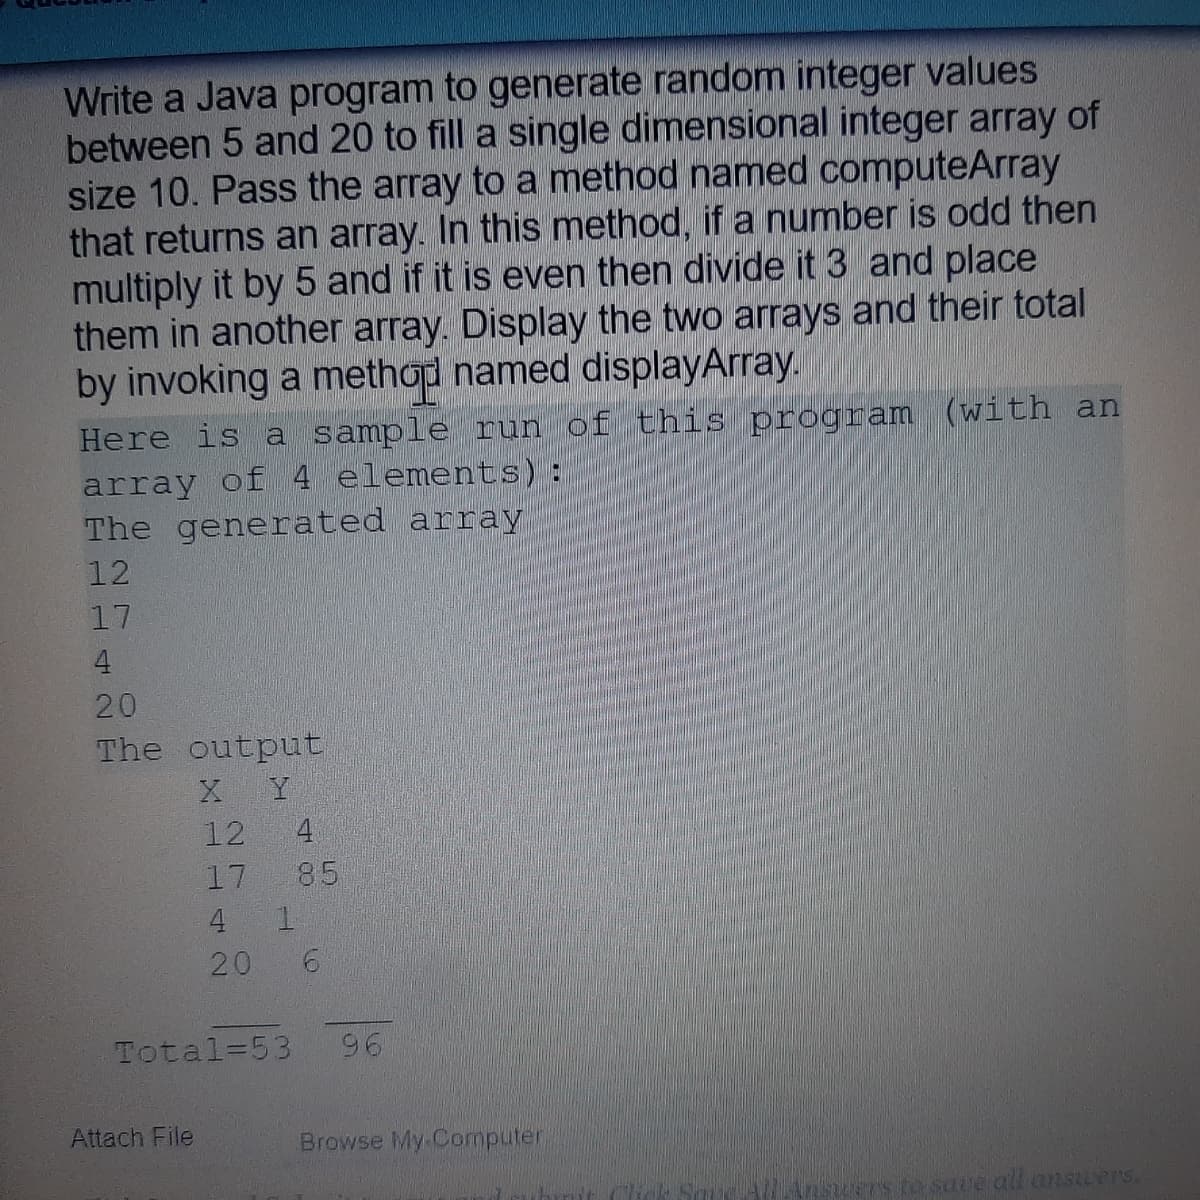 Write a Java program to generate random integer values
between 5 and 20 to fill a single dimensional integer array of
size 10. Pass the array to a method named computeArray
that returns an array. In this method, if a number is odd then
multiply it by 5 and if it is even then divide it 3 and place
them in another array. Display the two arrays and their total
by invoking a method named displayArray.
Here is a sample run of this program (with an
array of 4 elements) :
The generated array
12
17
4
20
The output
Y
12
4
17
85
4
1.
20
Total=53
96
Attach File
Browse My Computer
7s to sate all answers.
